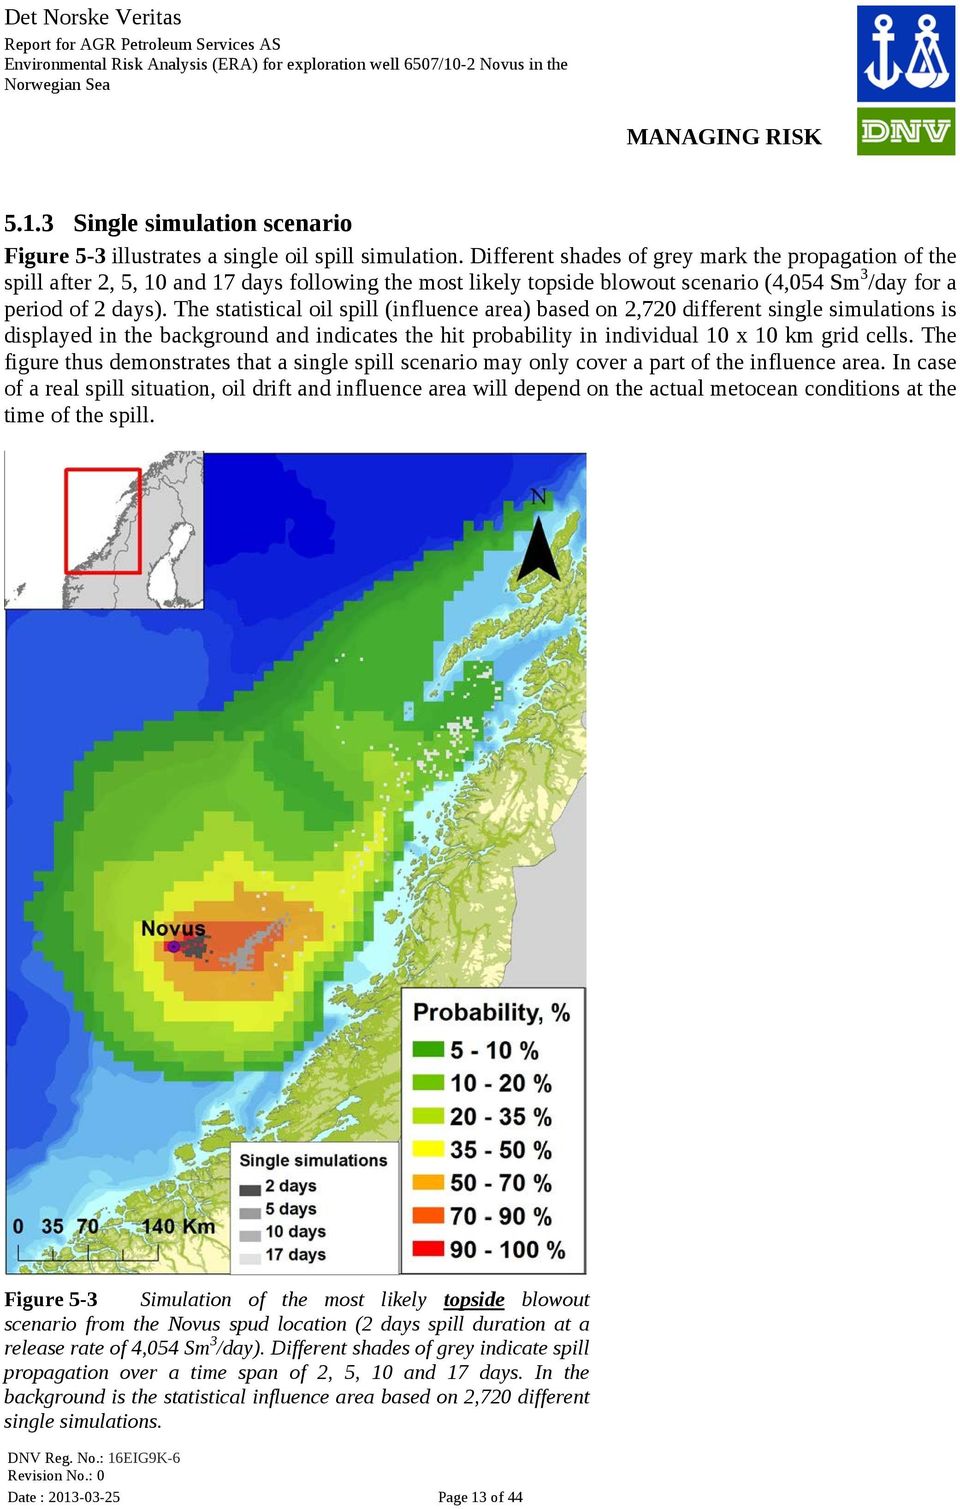 The statistical oil spill (influence area) based on 2,720 different single simulations is displayed in the background and indicates the hit probability in individual 10 x 10 km grid cells.